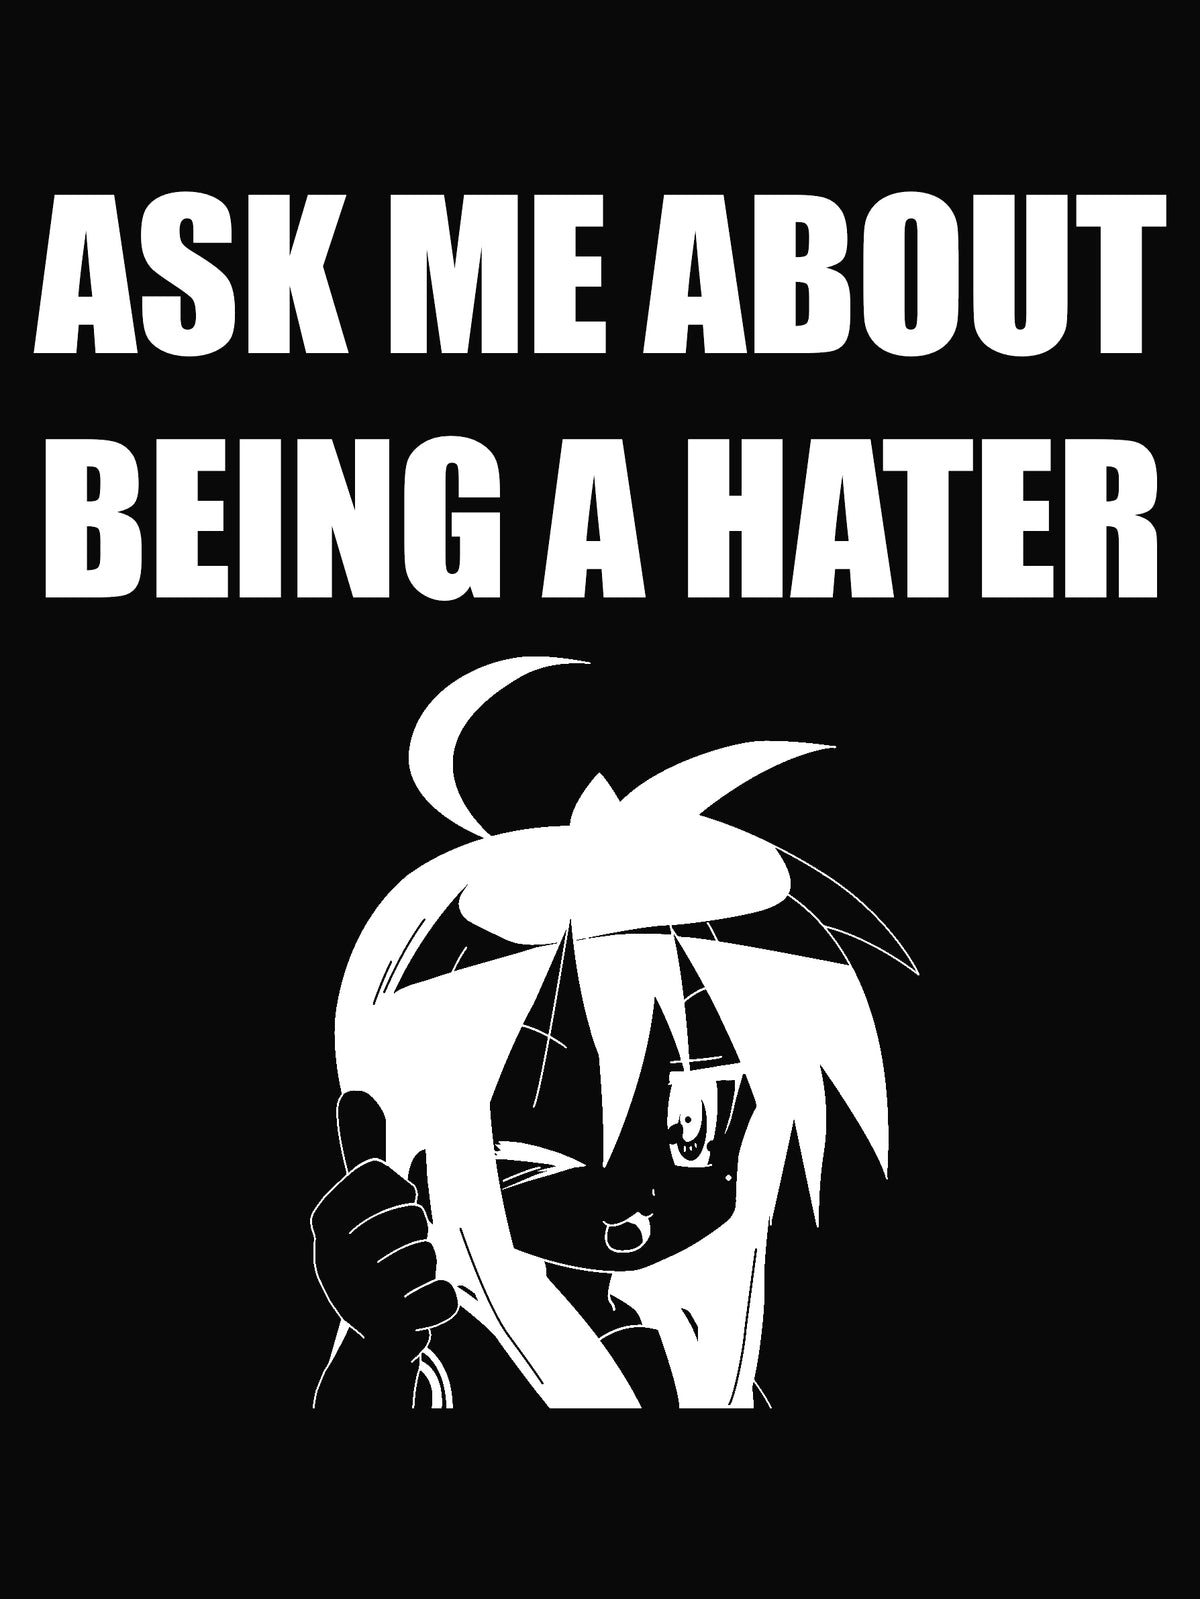 ASK A HATER by cult.party